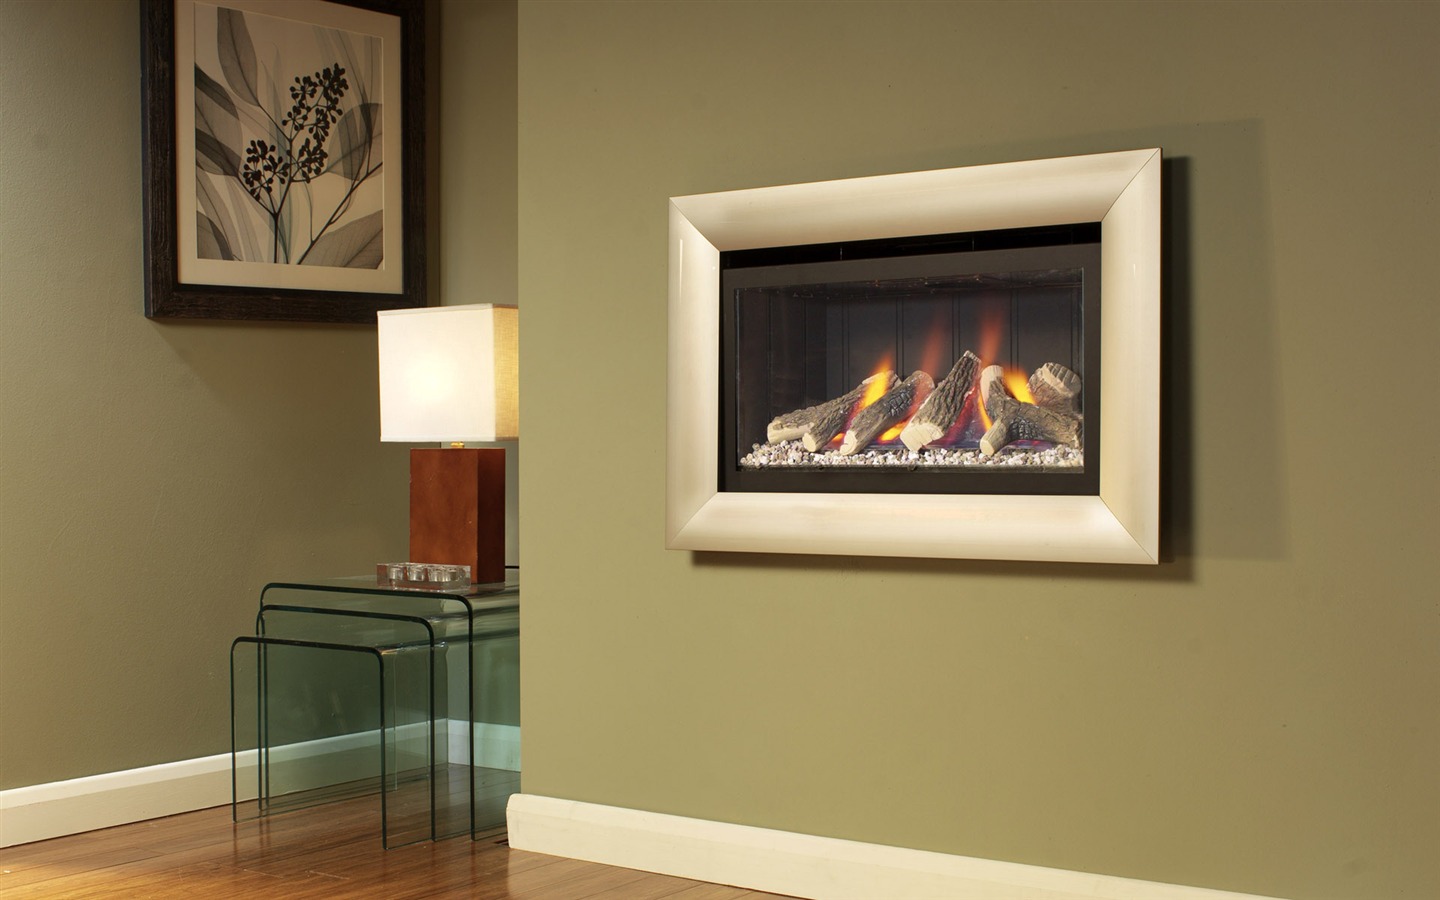 Western-style family fireplace wallpaper (2) #2 - 1440x900